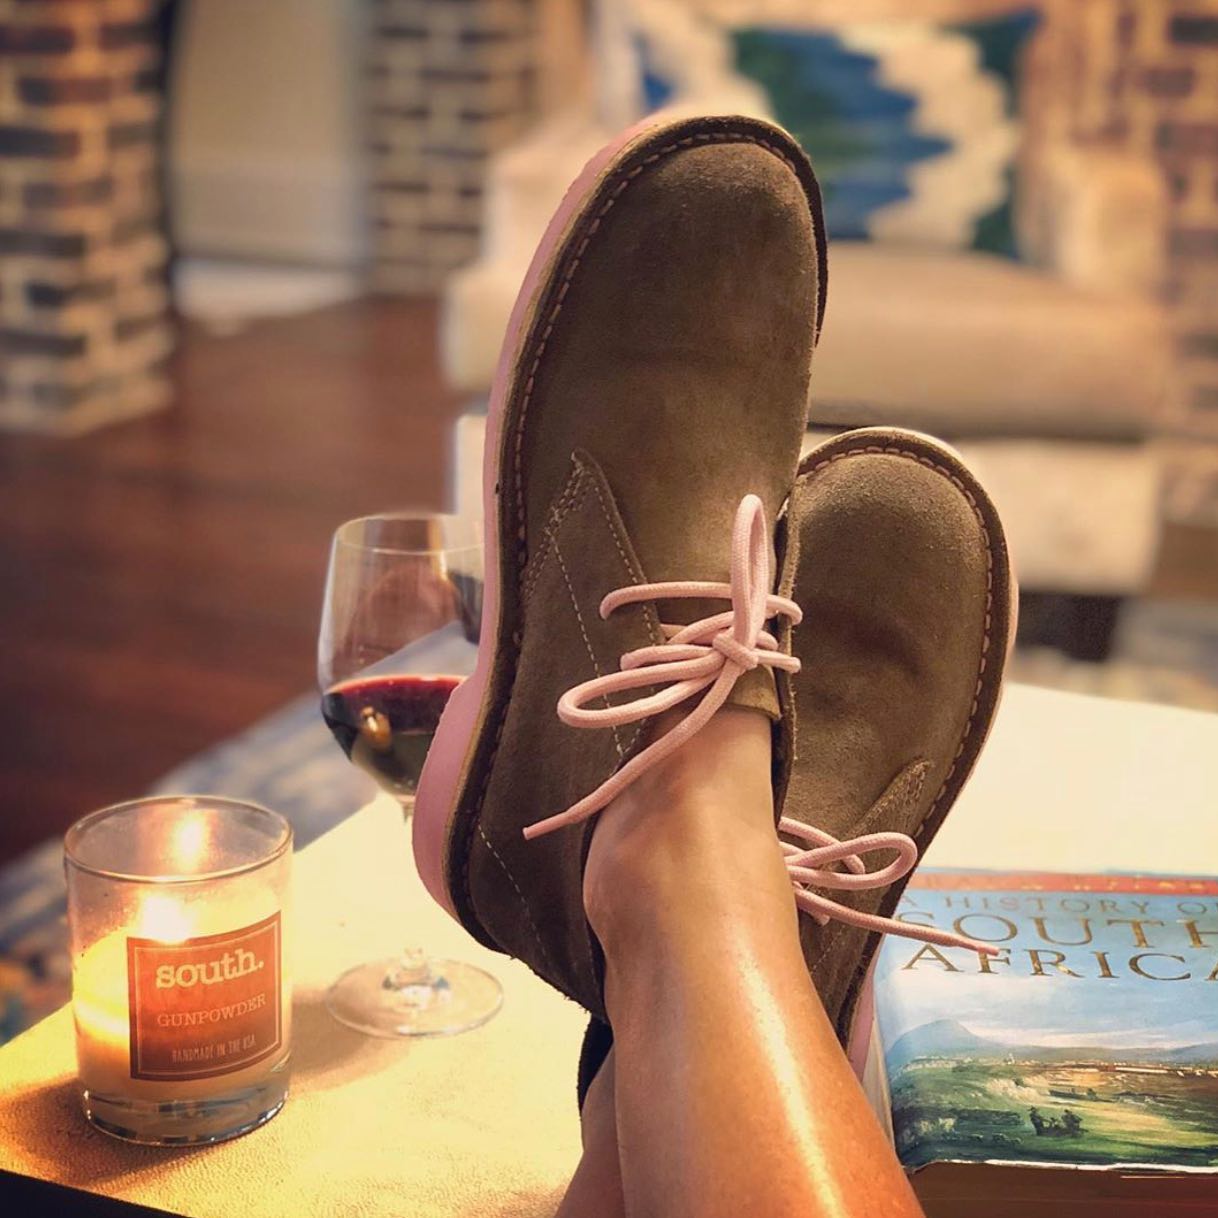 Kick back your feet & relax, it’s wine o’clock 🍷 @lizlkotz  bringing a taste of her South African roots to South Carolina #veldskoen .
.
.
#howiwearmine #vellies #shoesday #dailysole #shoefie #solesociety #solesonfire #shoegasm #handmadeshoes #stylehunters #footwearlove #wineoclock #wineoclock🍷 #desertboots #pinksoles #womenshoes #womenboots #bootlover #wearingtoday #fallfeels #whatsonyourfeet #suedeshoes #coolshoes